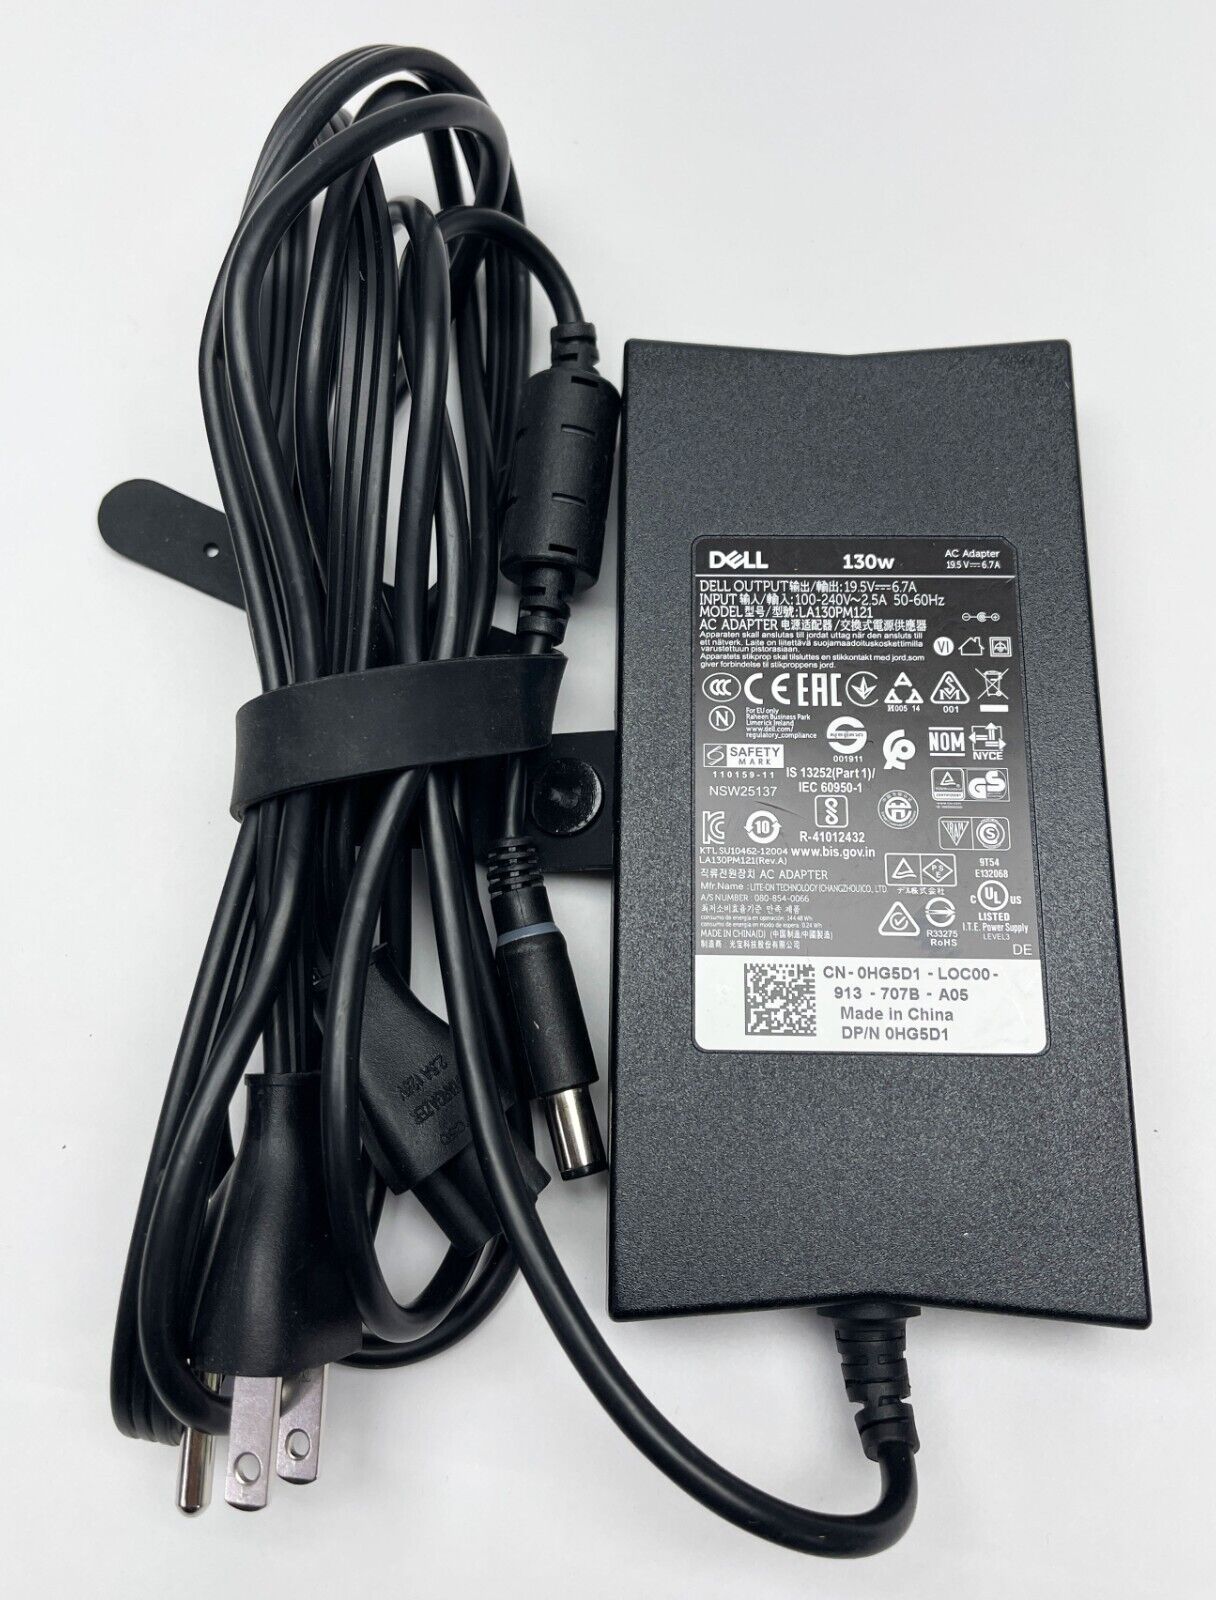 DELL 130W 19.5V, 6.7A Charger LA130PM121 AC power Adapter Charger DP/N 0HG5D1